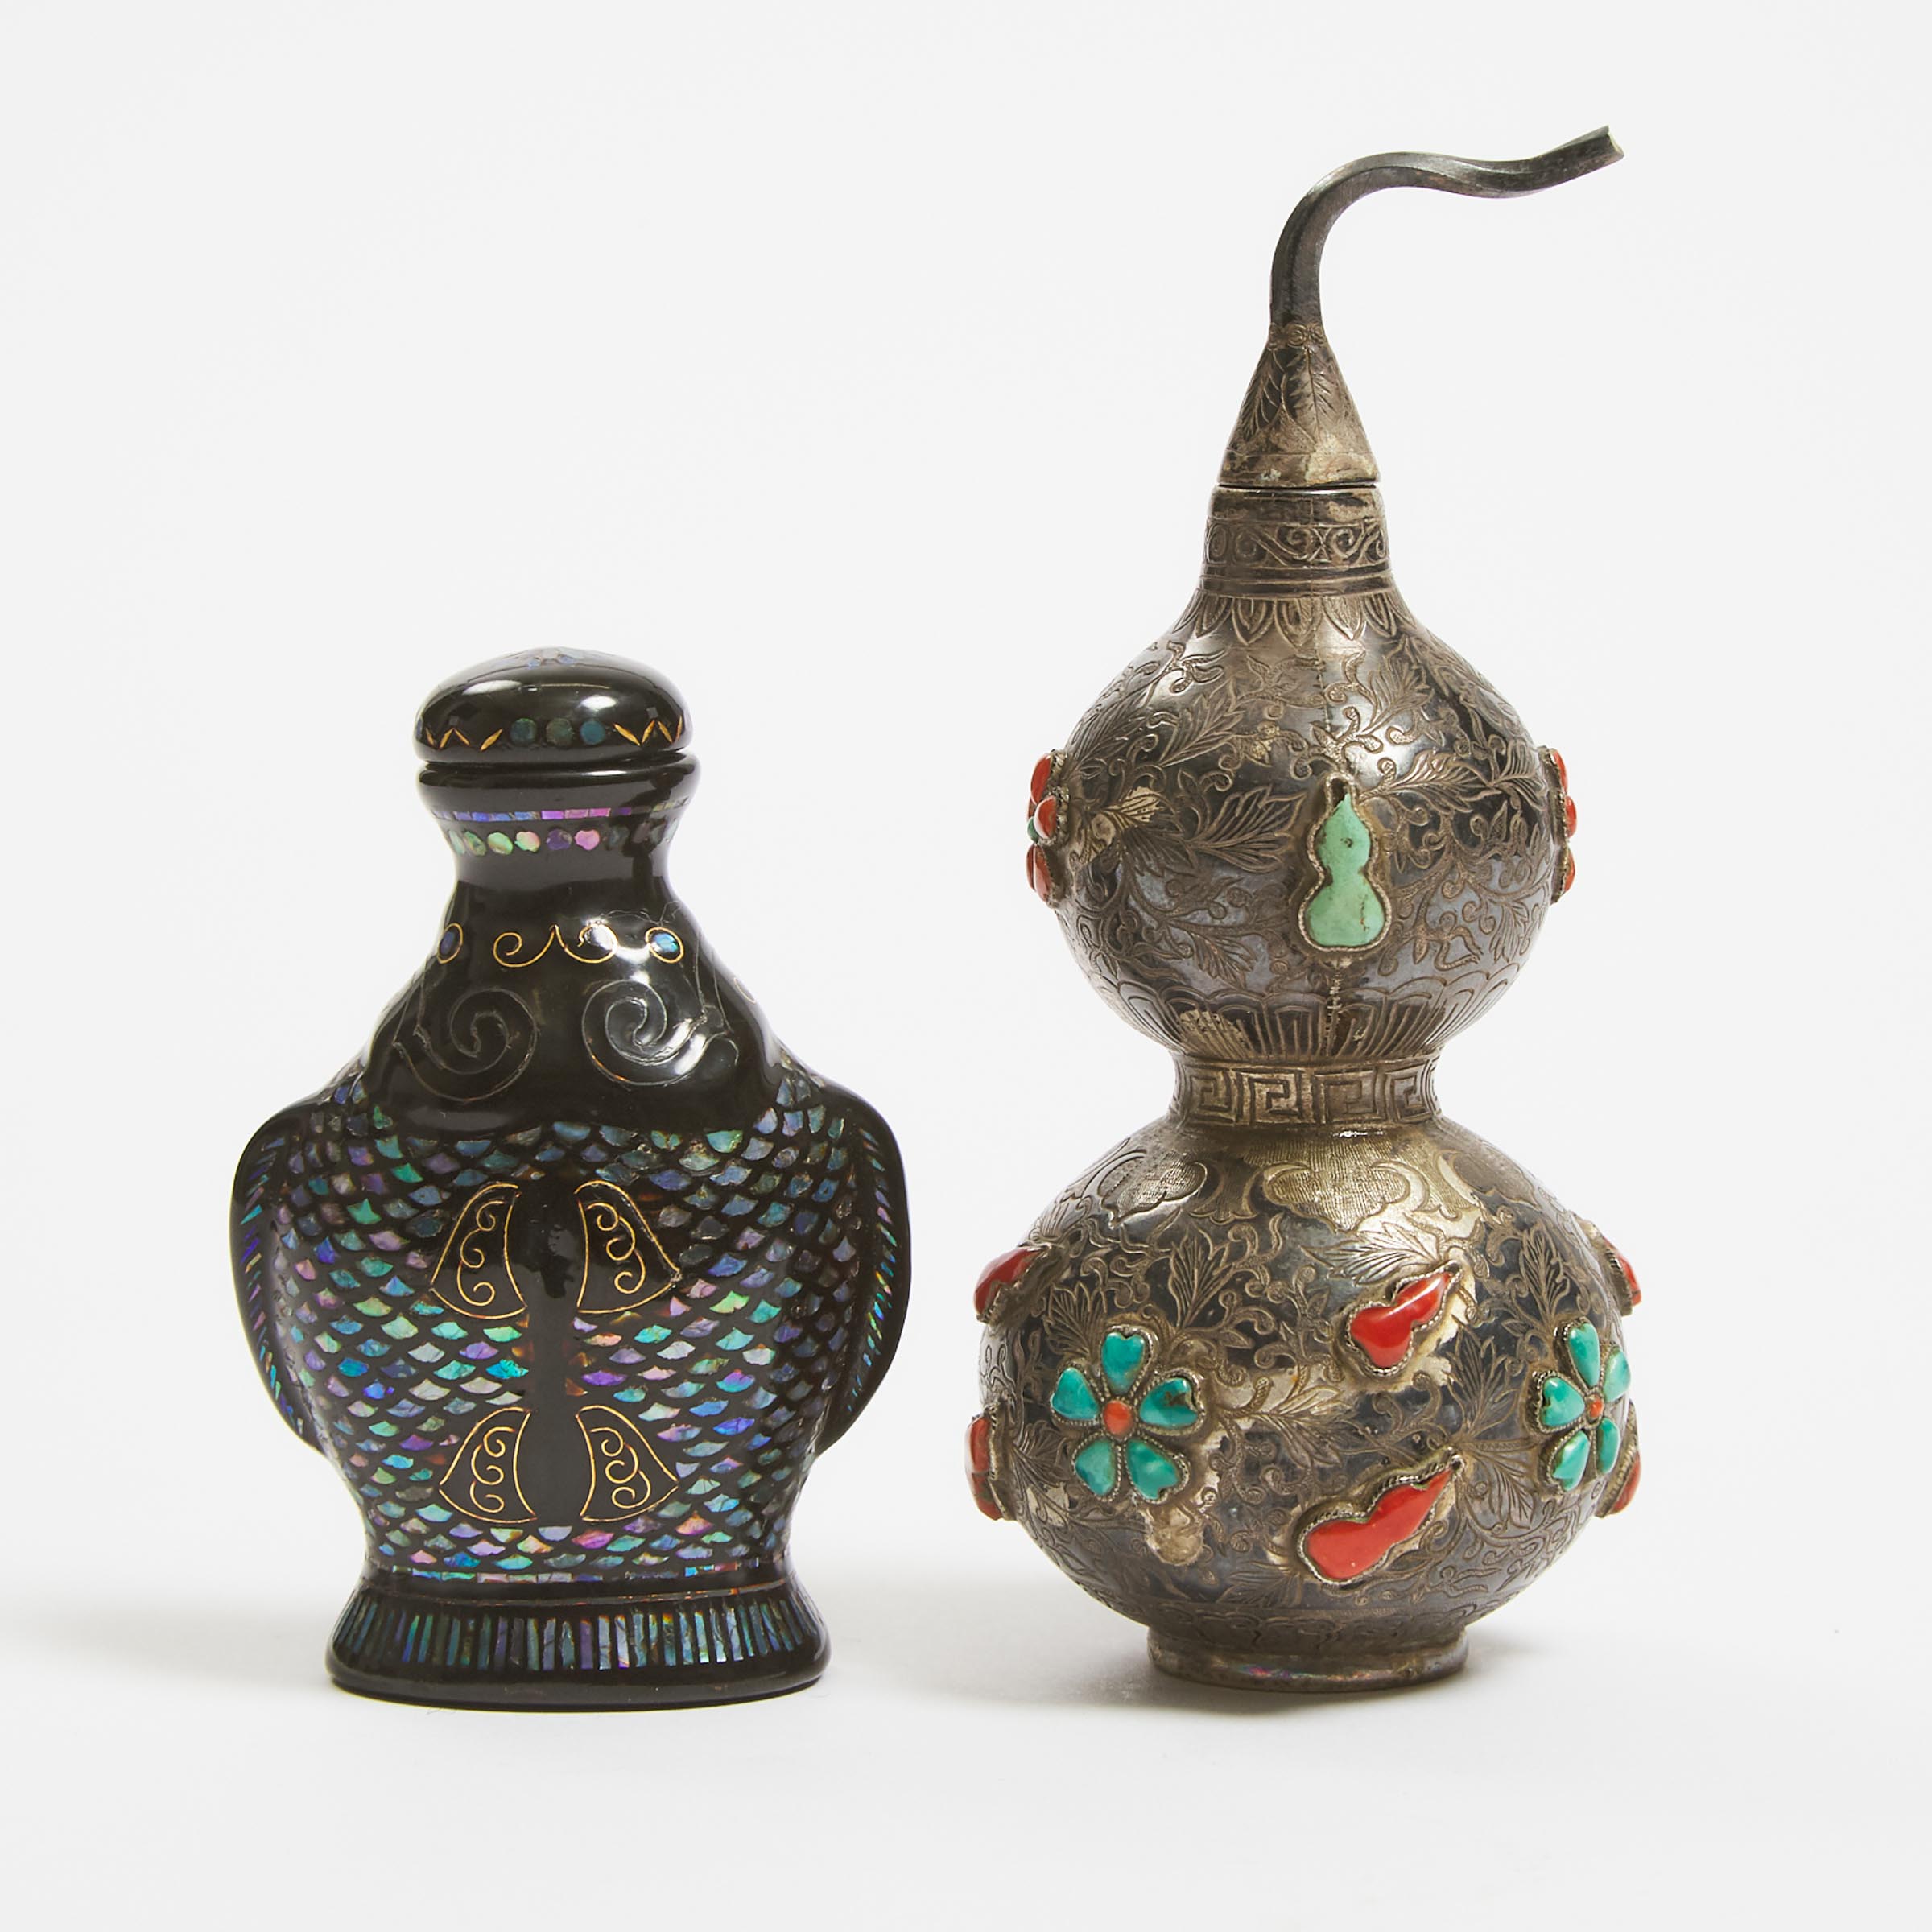 A Lac Burgauté 'Double Fish' Snuff Bottle, Together With an Embellished Silver Snuff Bottle, 19th/20th Century